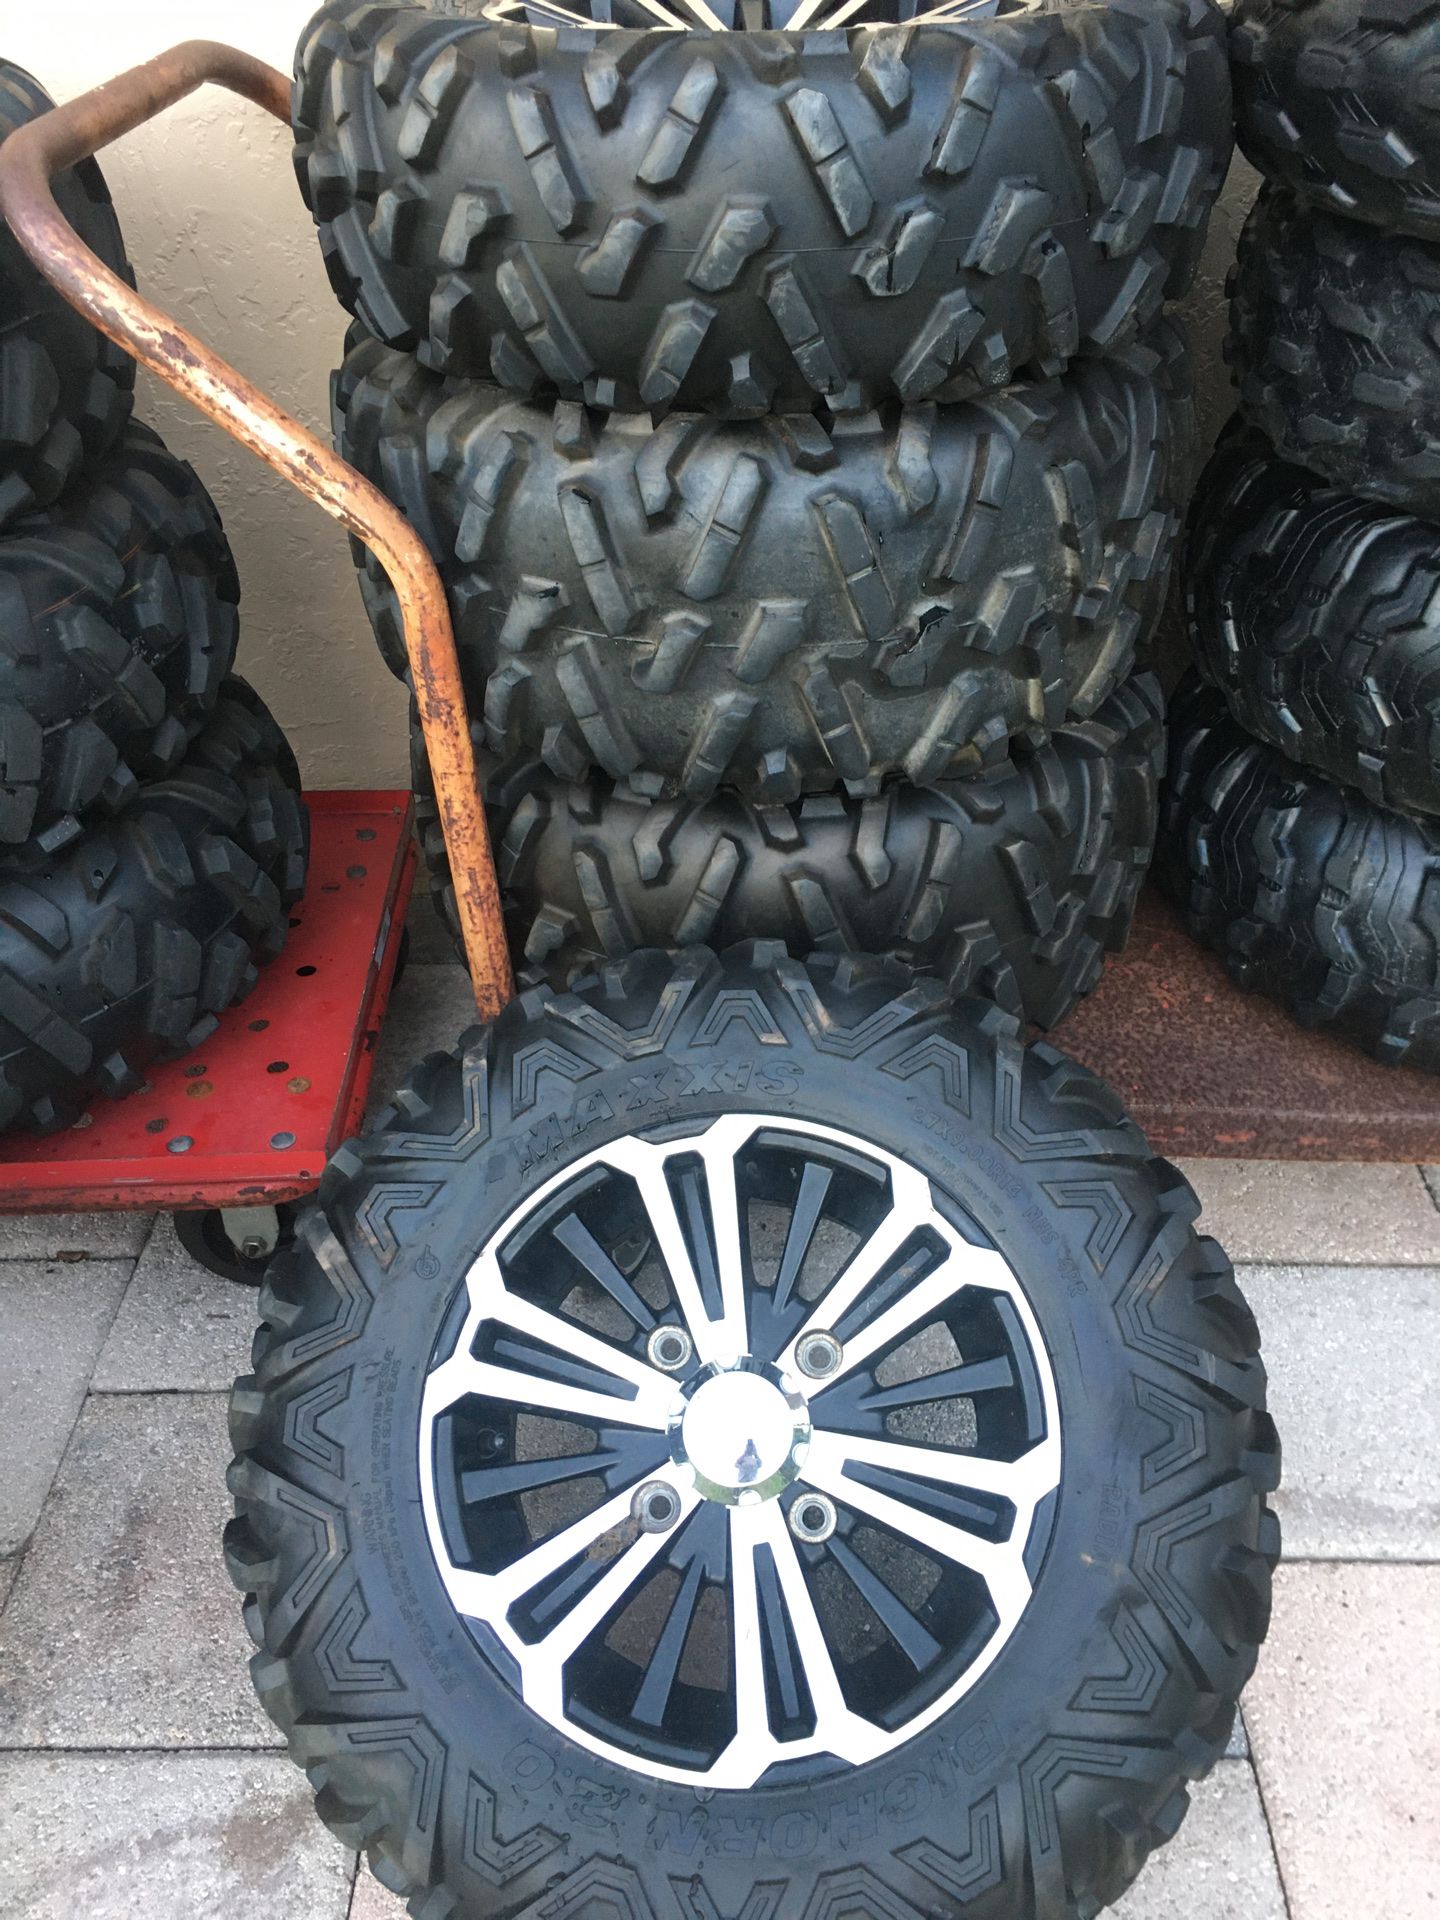 Honda pioneer 1000 tires and wheels takeoffs no patches no plugs new condition